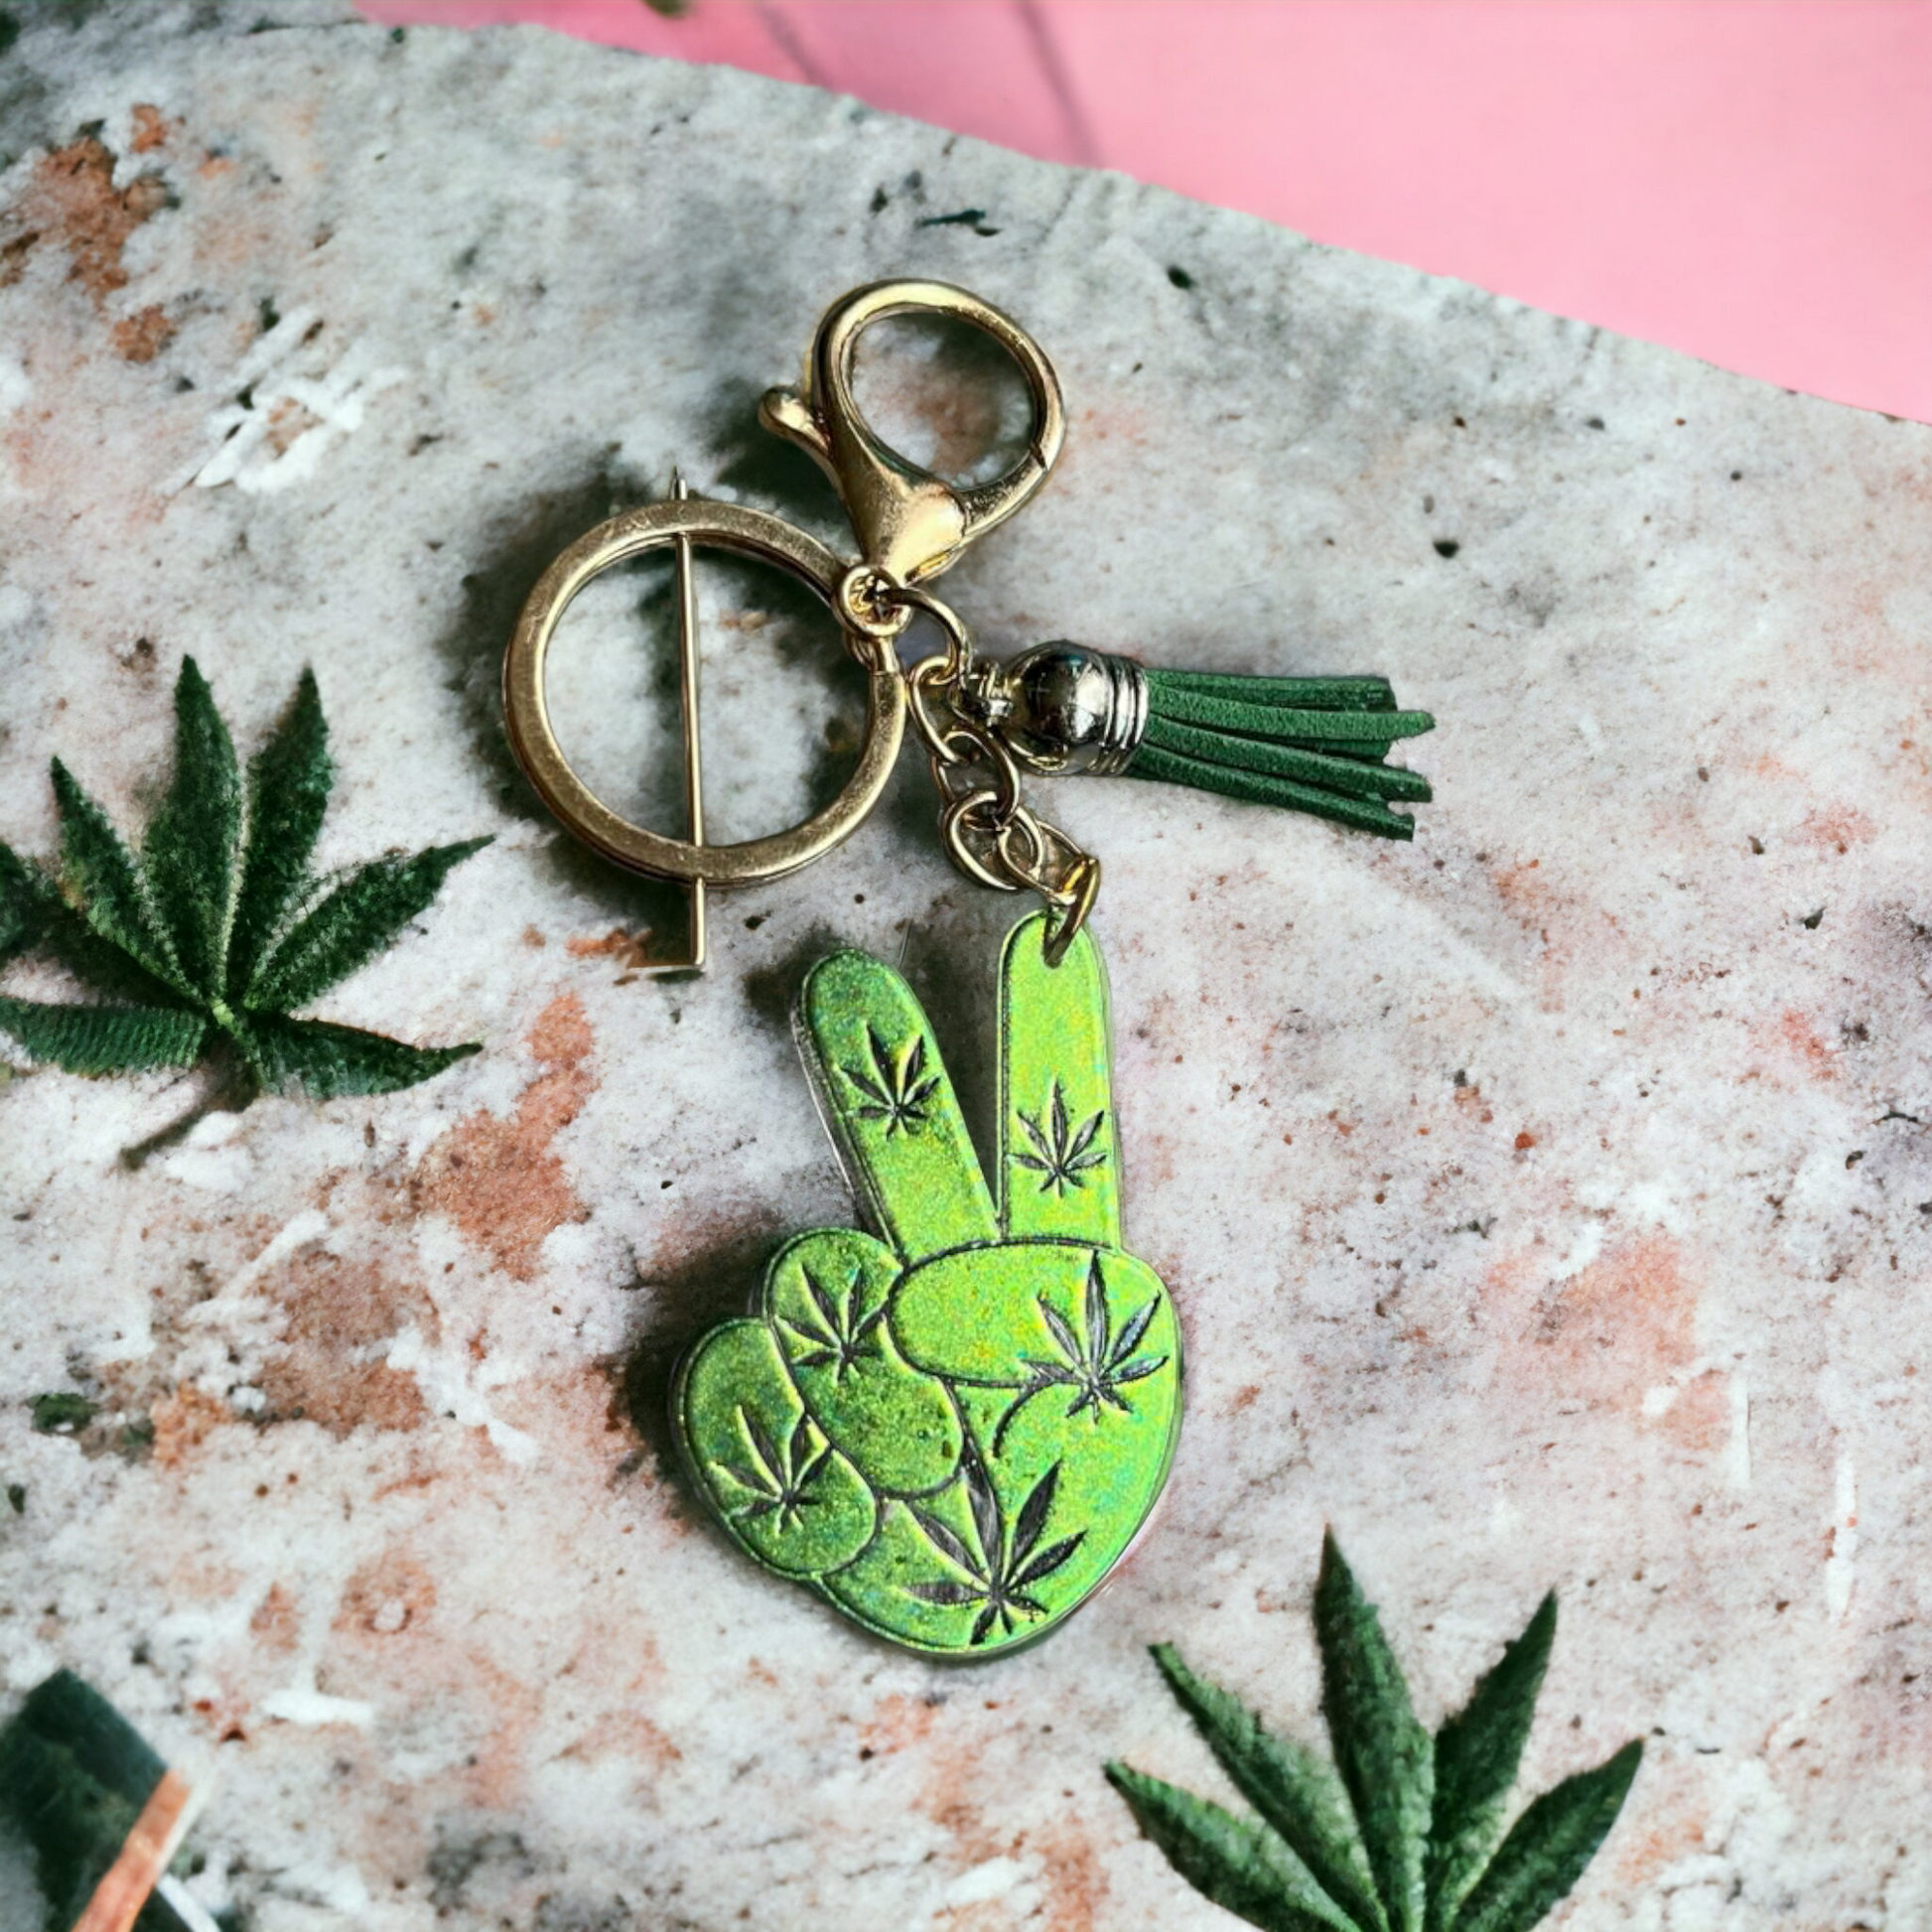 Cannabis Peace Silicone Resin Mould - Keipach